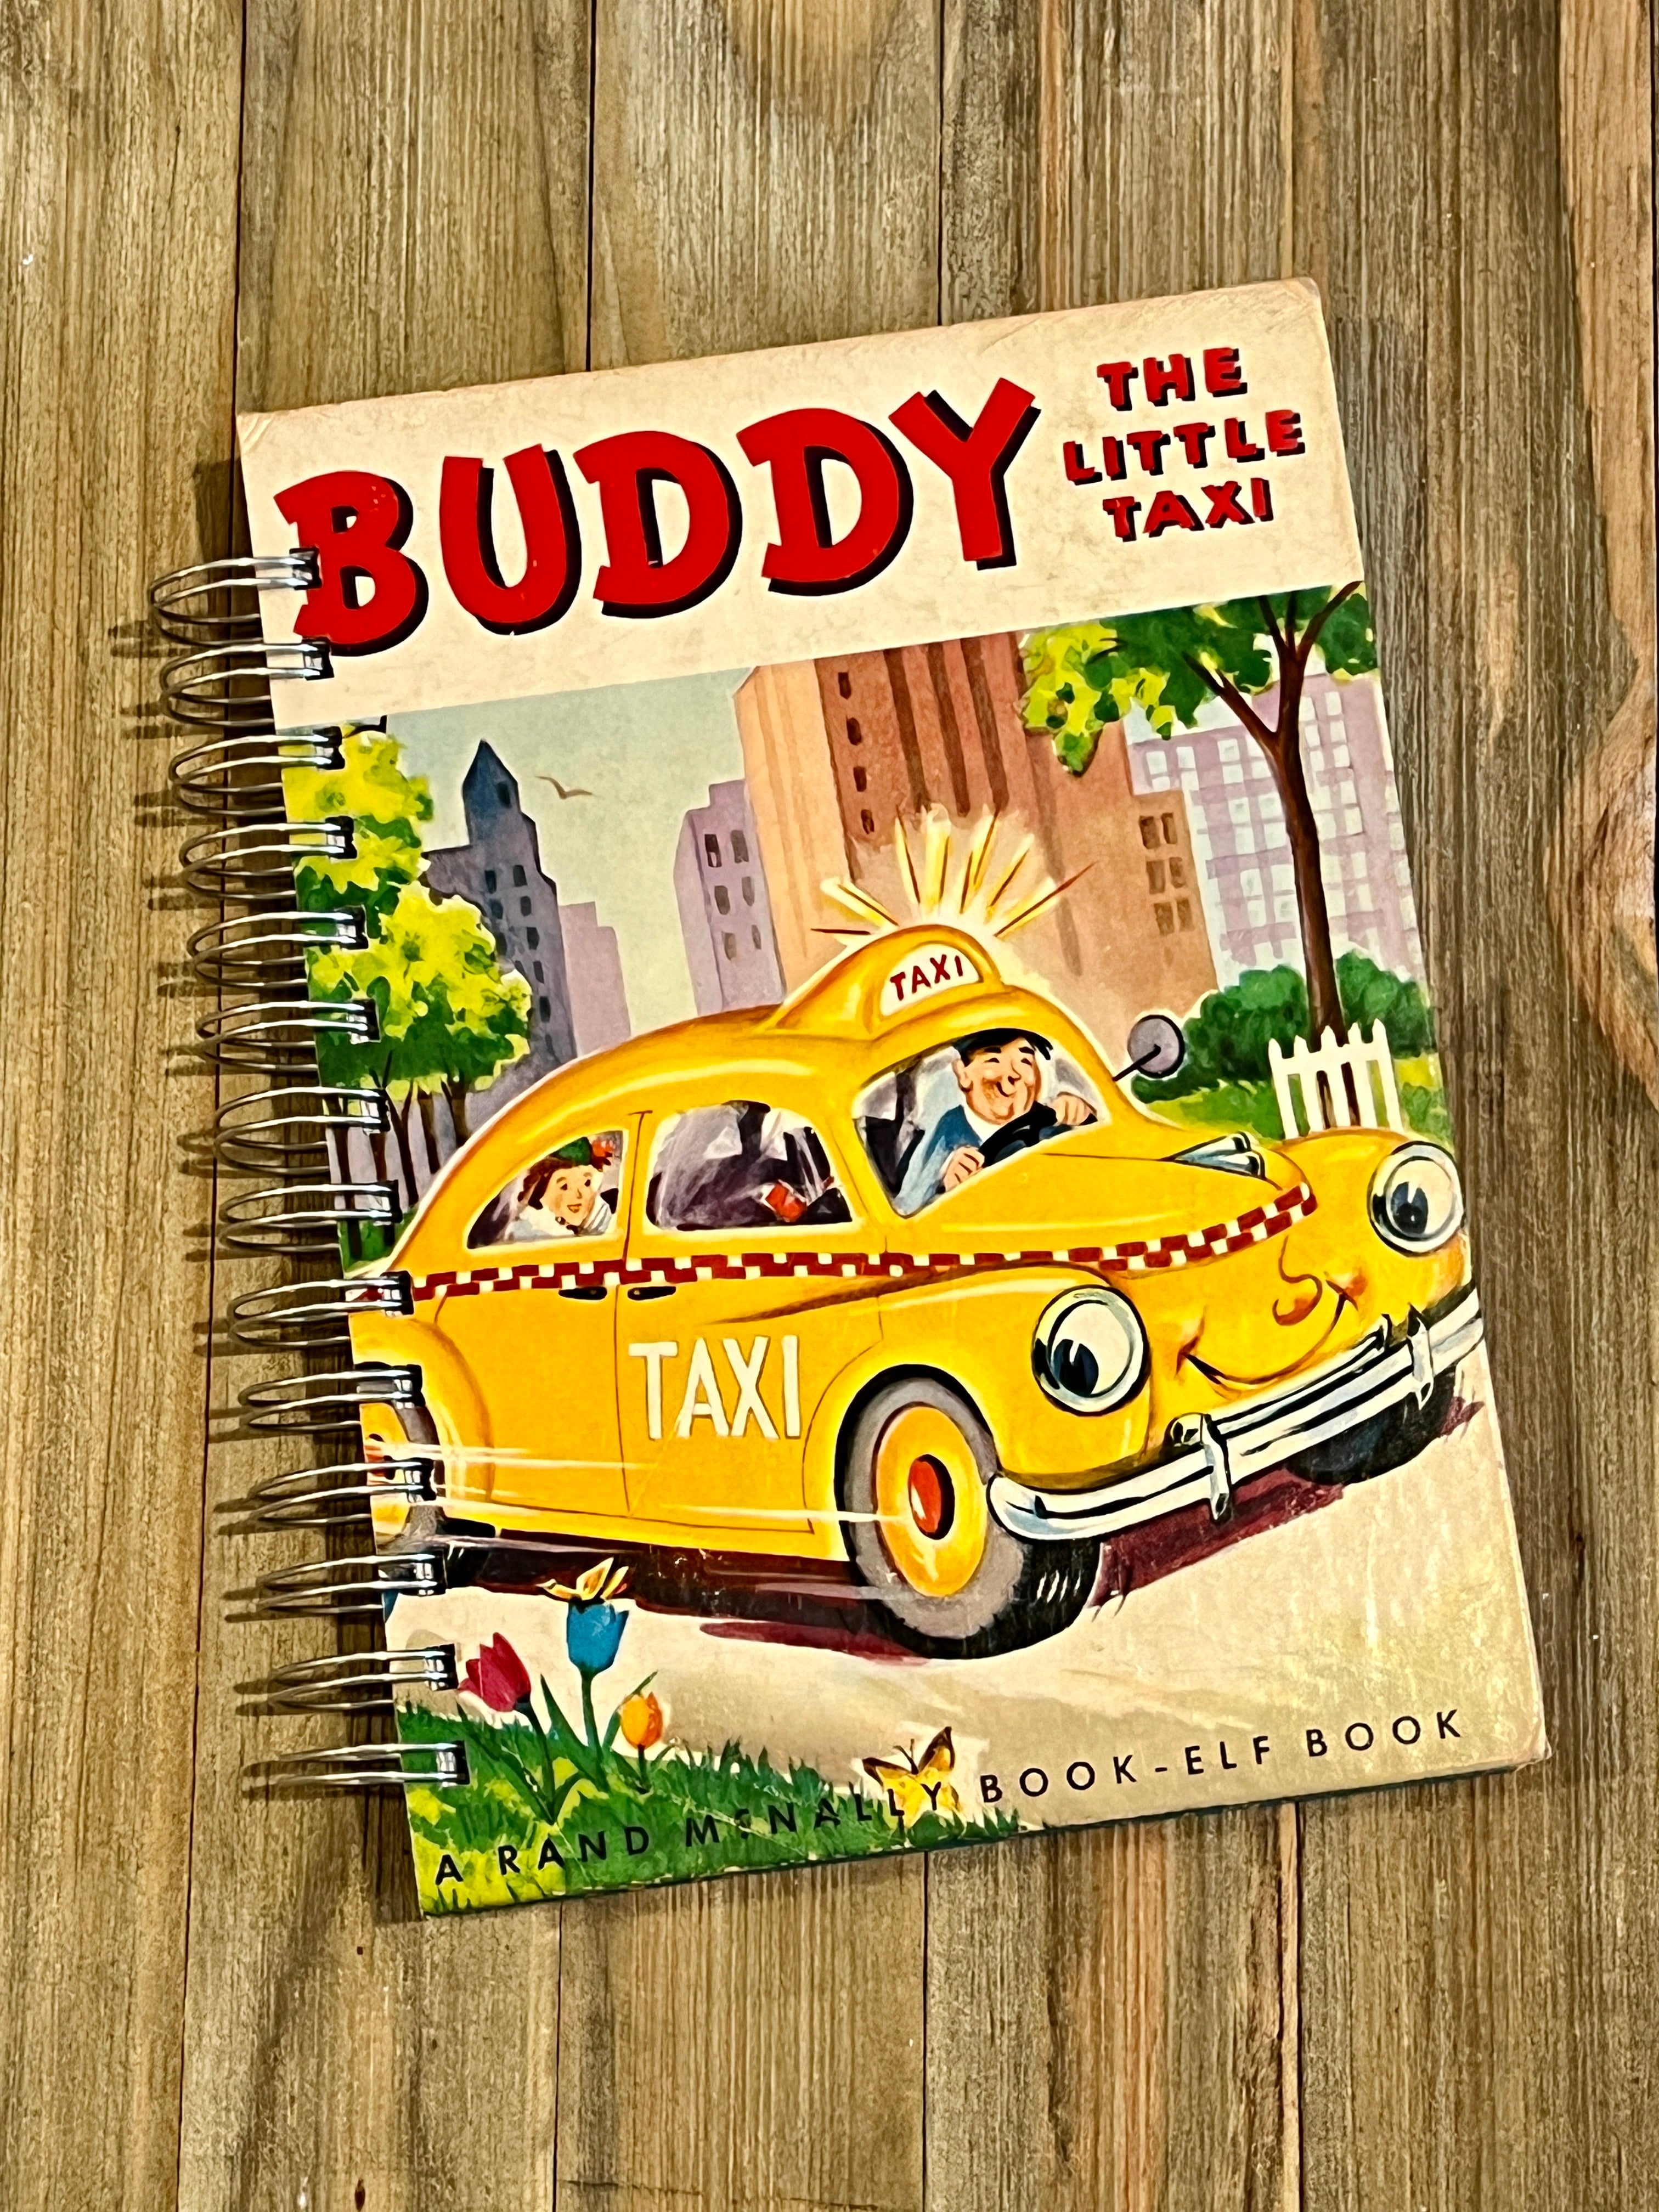 Buddy the Little Taxi